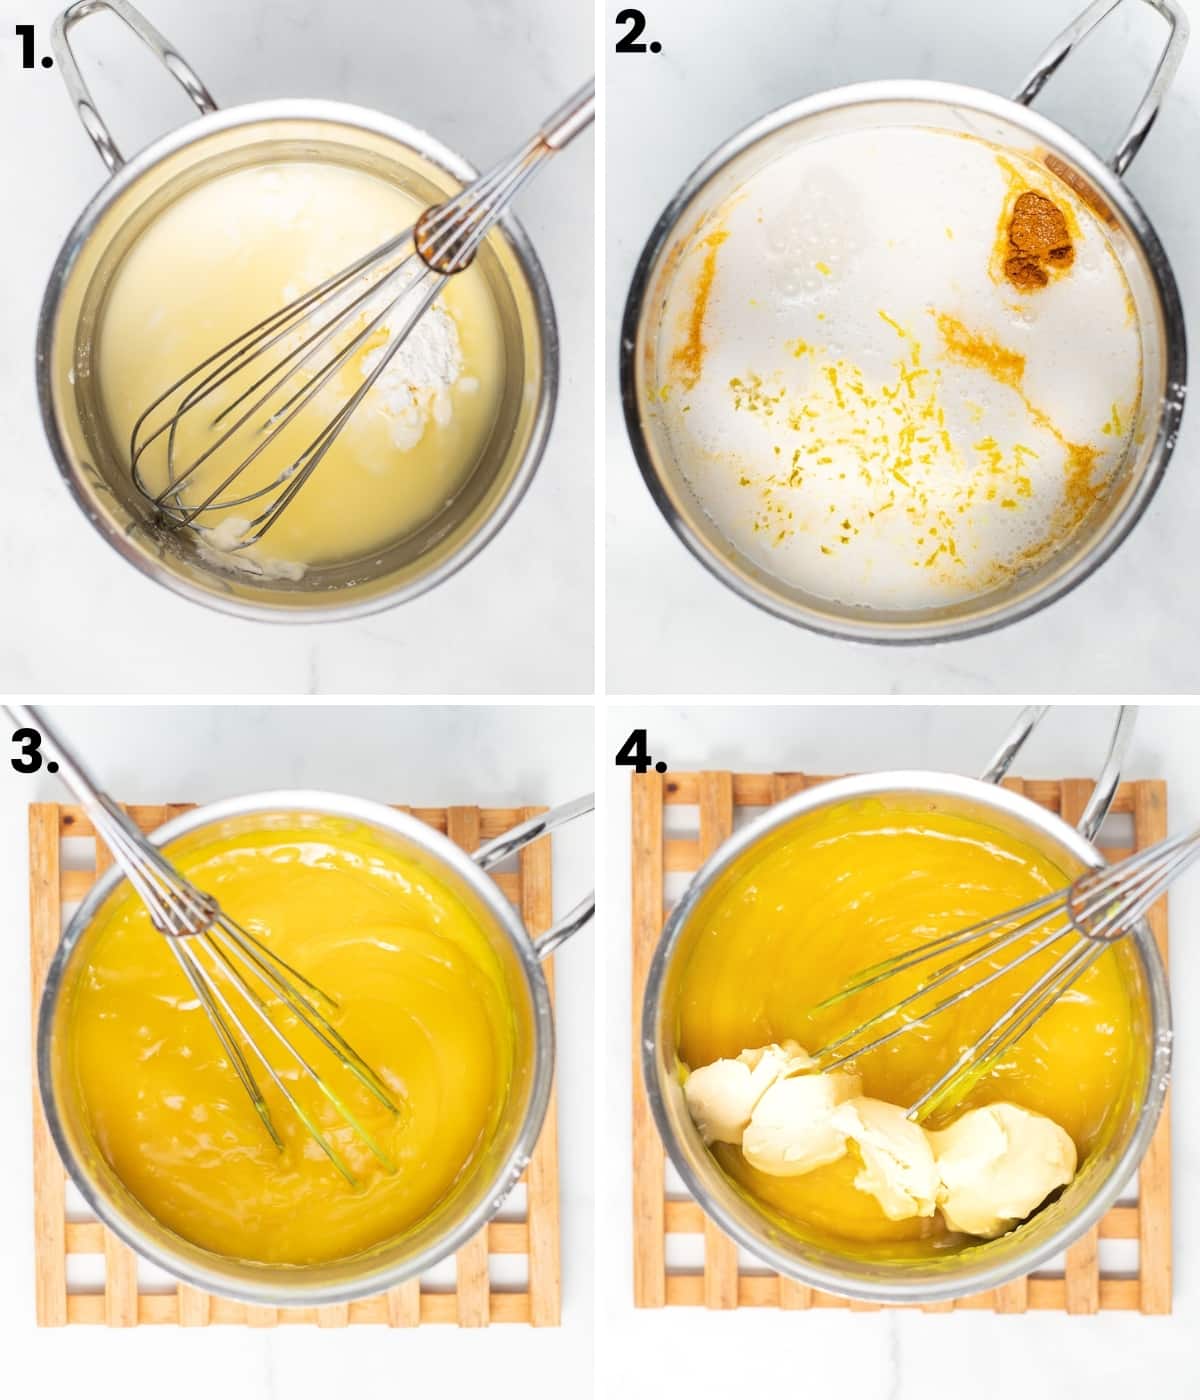 sstep by step photos of the making of vegan lemon curd as per the written instructions